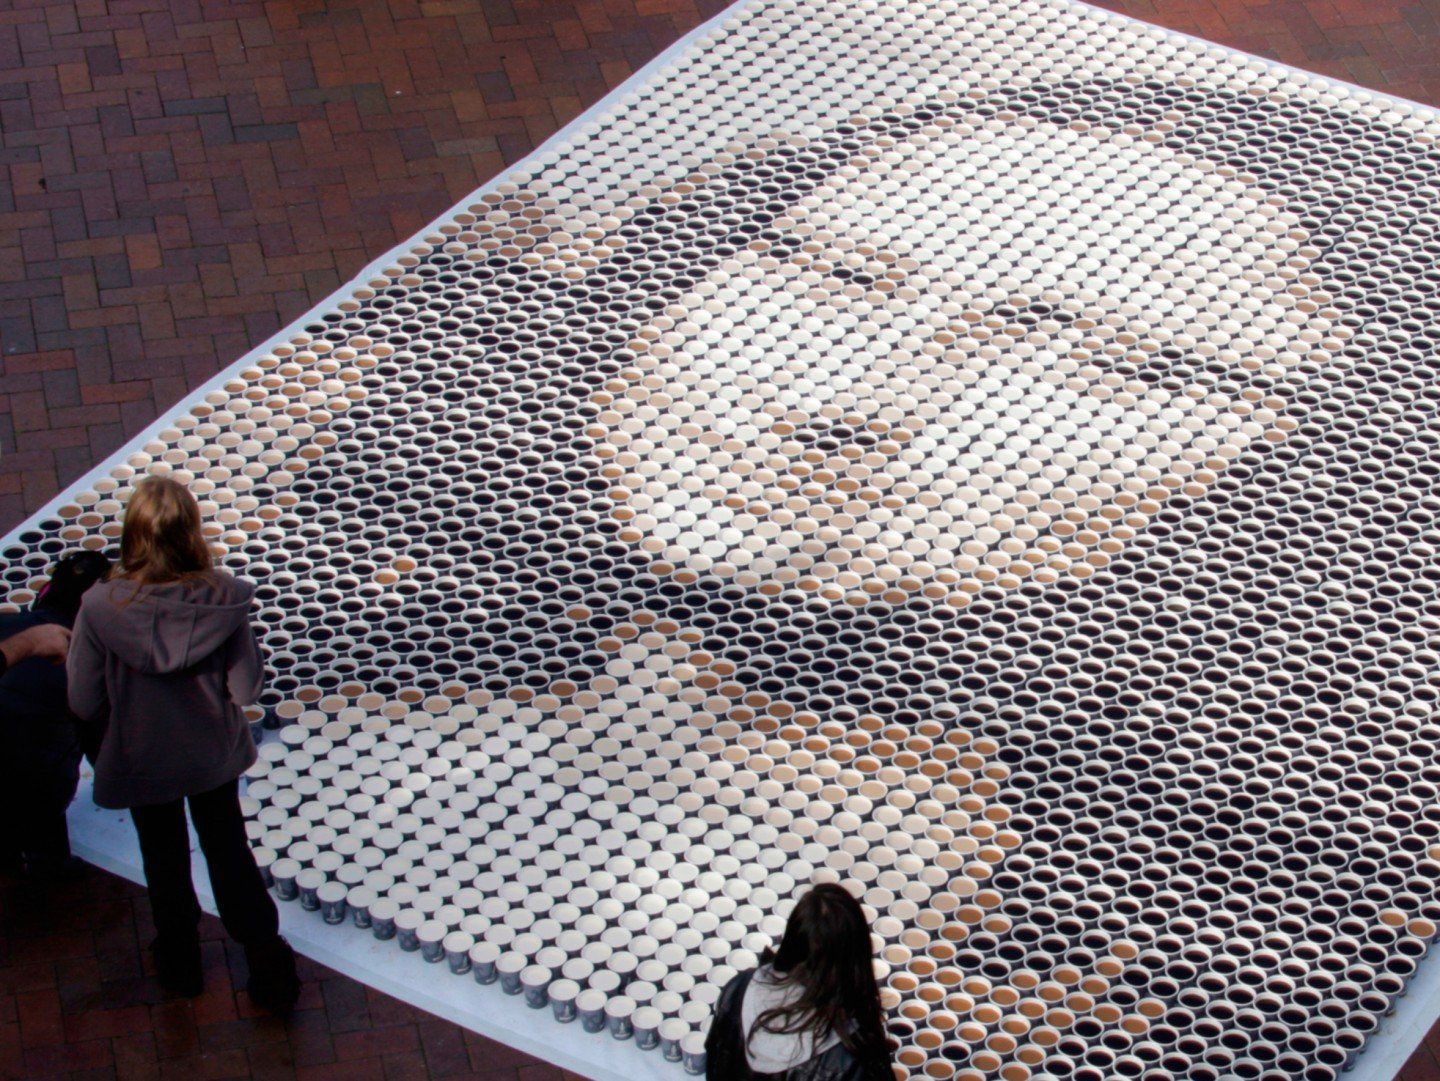 Created for The 2009 Rocks Aroma Festival in Sydney, Australia, this Mona Lisa was seen by 130,000 people who attended the one-day coffee-lovers event. The Coffee Mona Lisa was made up of 3,604 cups of coffee. Each cup was filled with varying amounts of milk to black coffee. It measured 20 feet high and 13 feet wide and took a team of eight people three hours to complete.